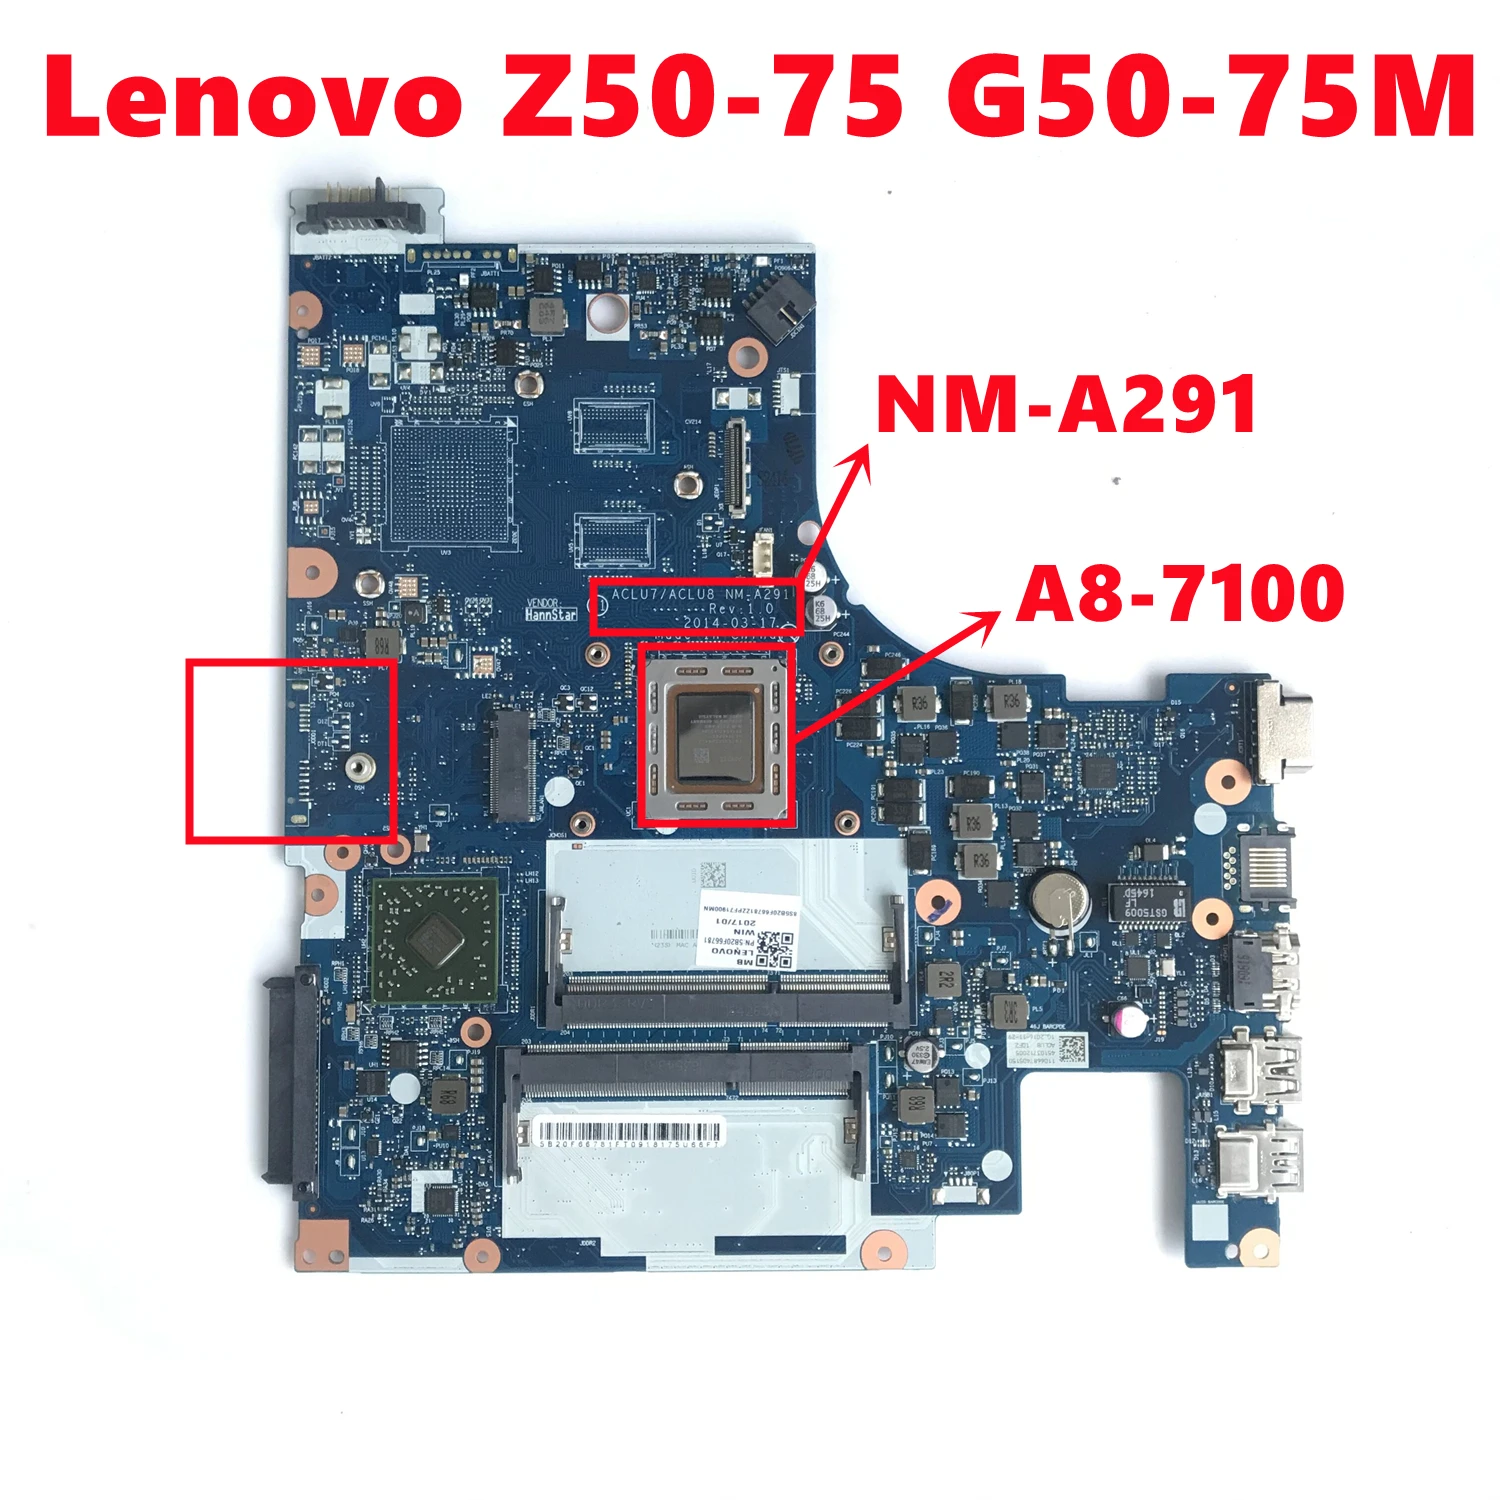 

ACLU7/ACLU8 NM-A291 Mainboard For Lenovo Z50-75 G50-75M Laptop Mainboard With AMD A8-7100 CPU DDR3 100% Test Working